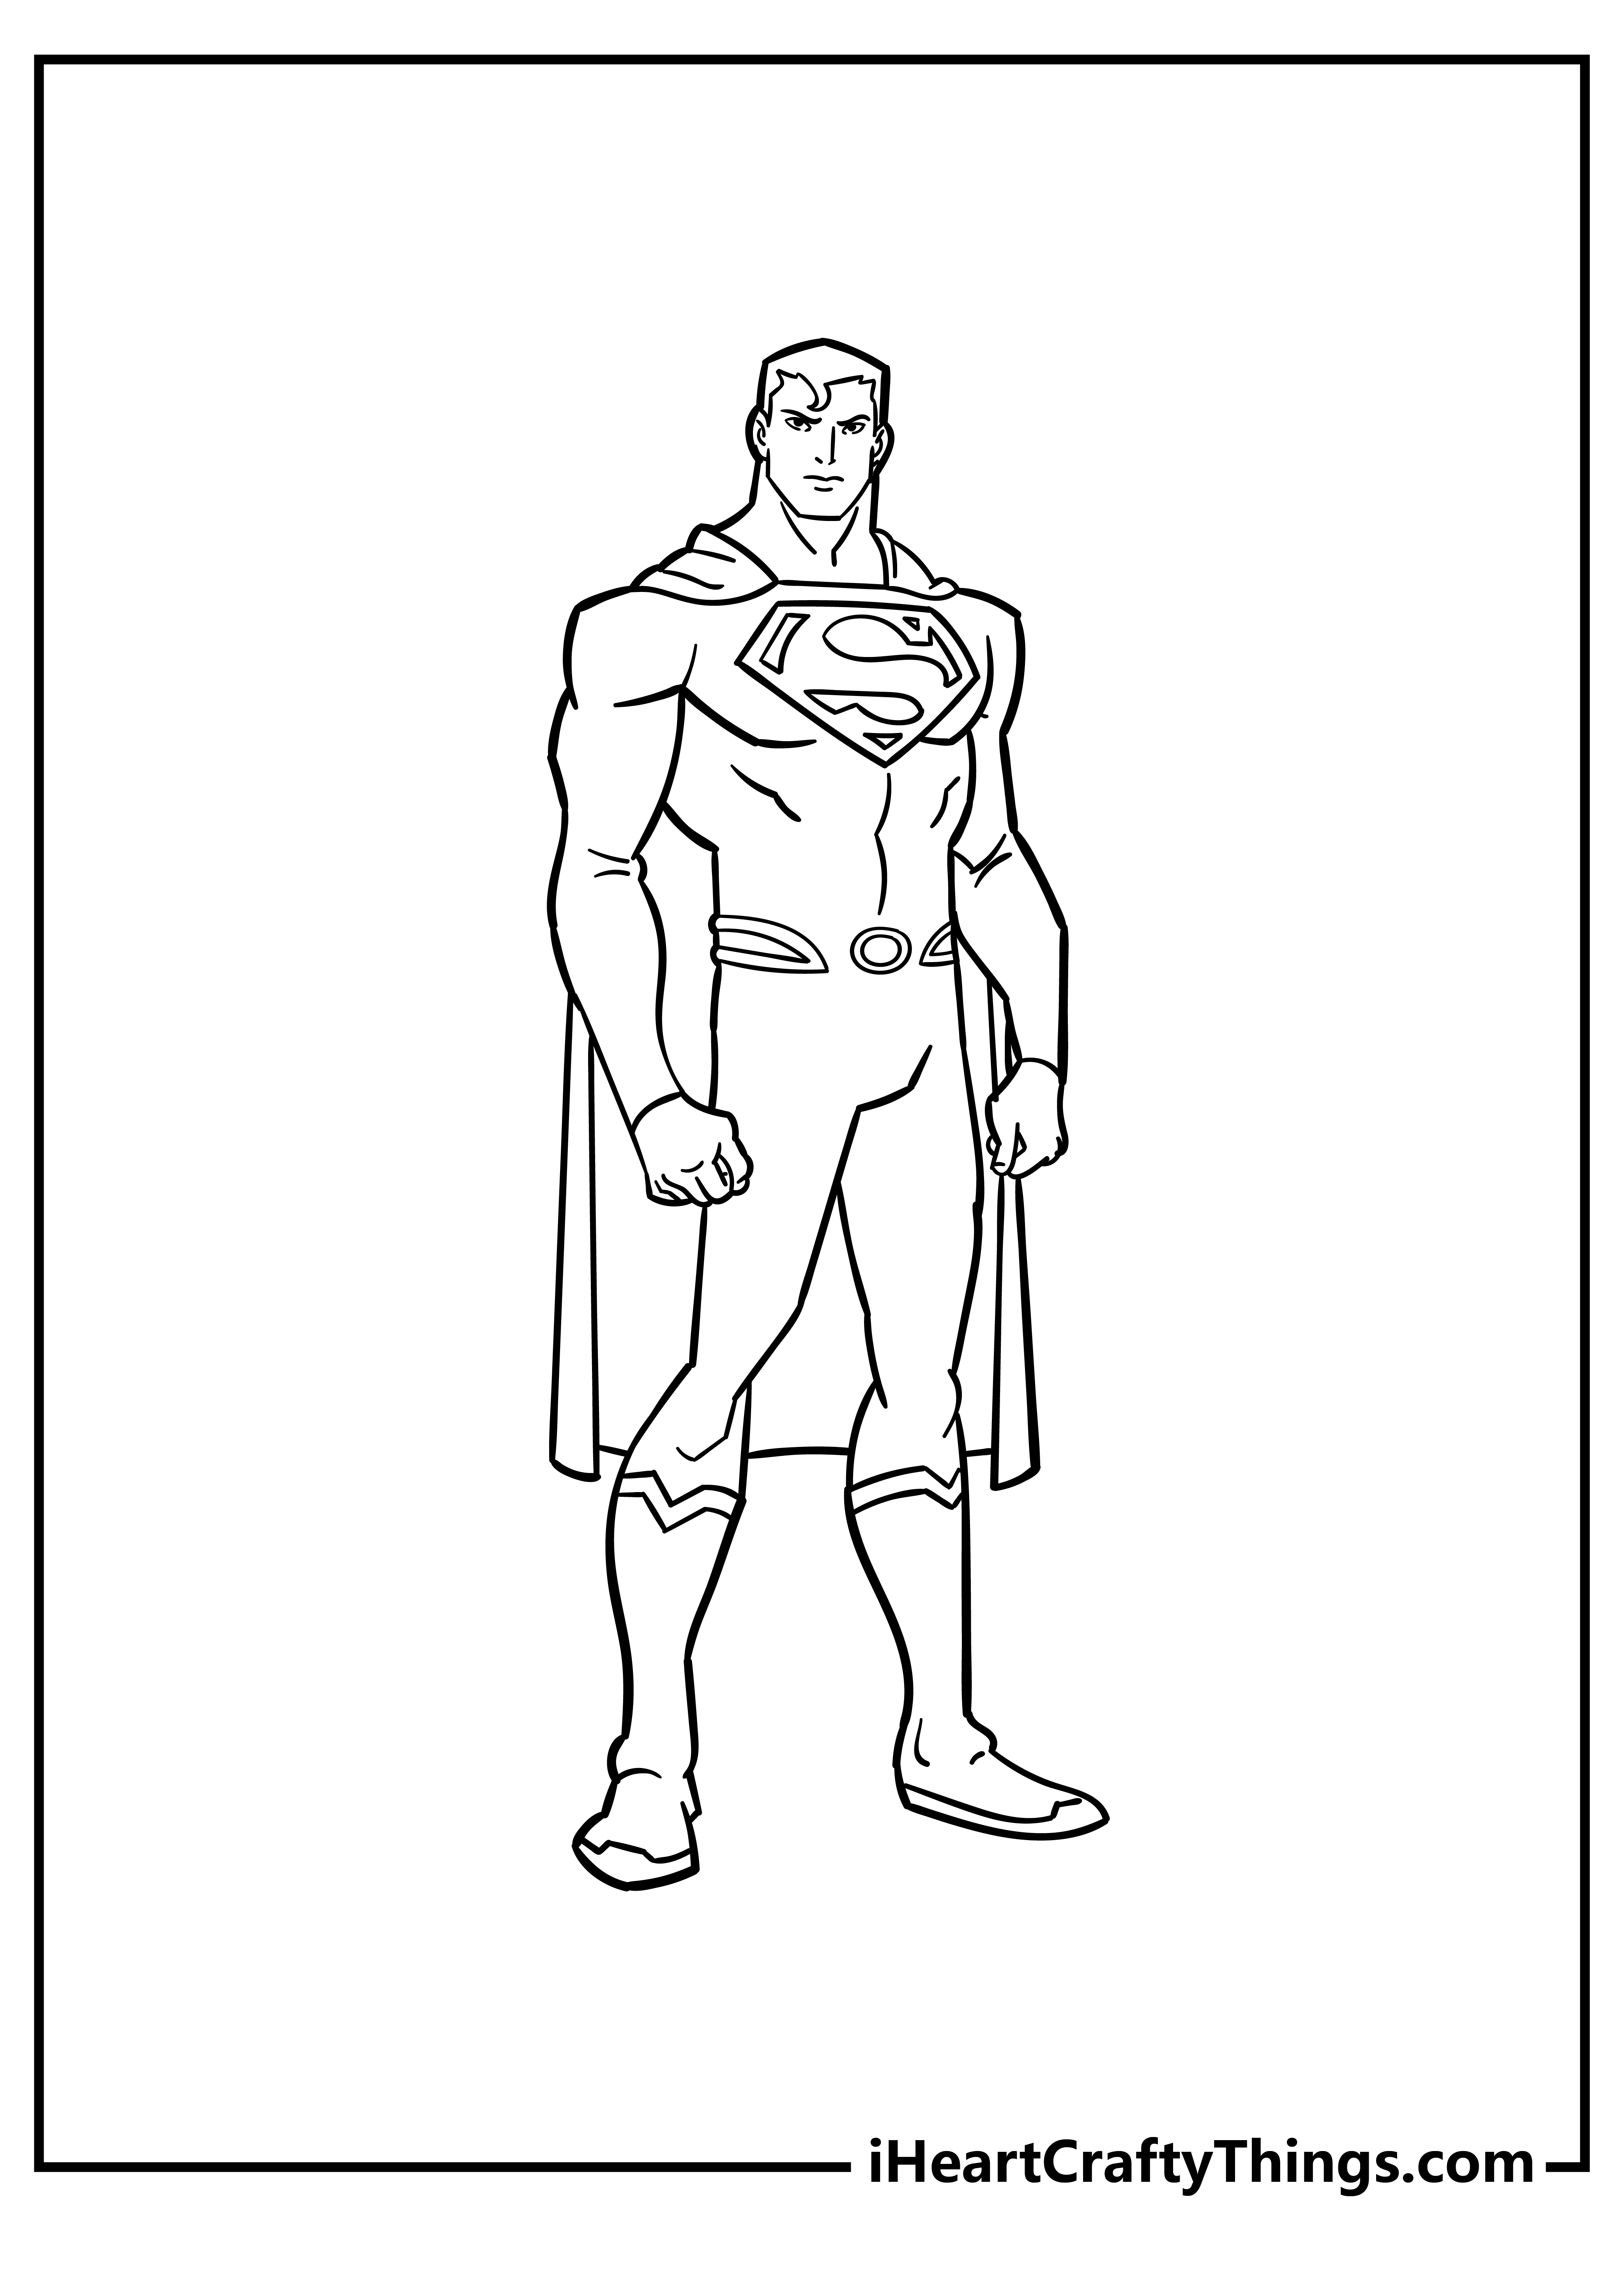 Superman Coloring Book for kids free printable